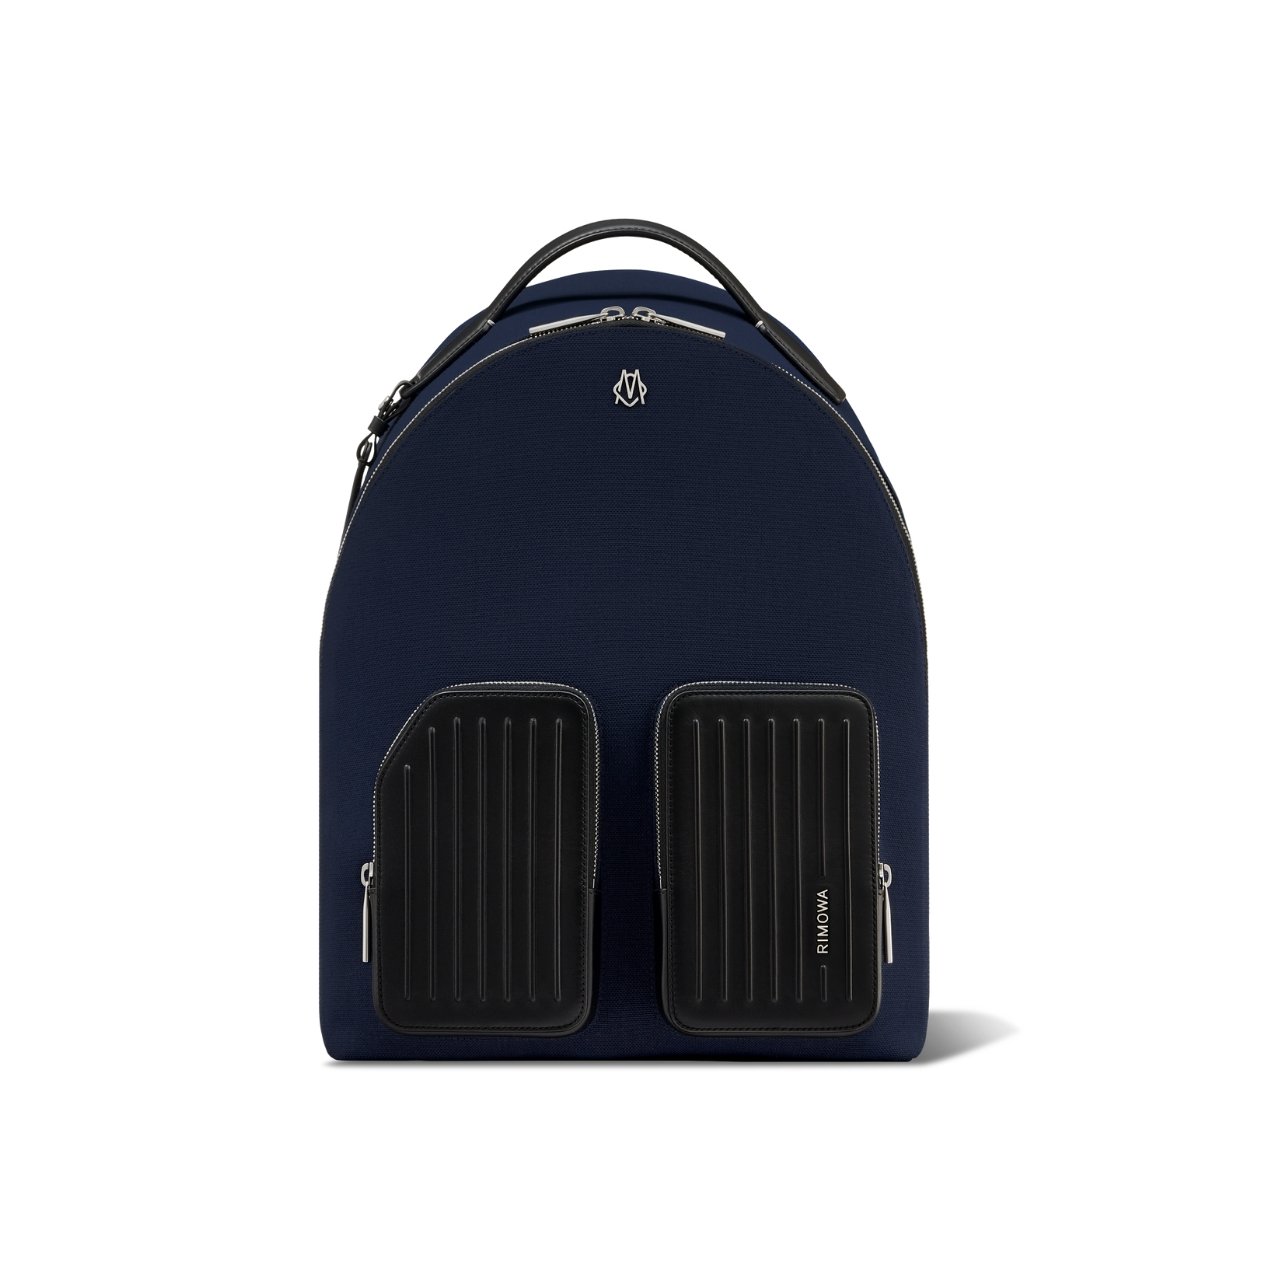 Rimowa backpack with zipper closure, two front pockets and a top handle